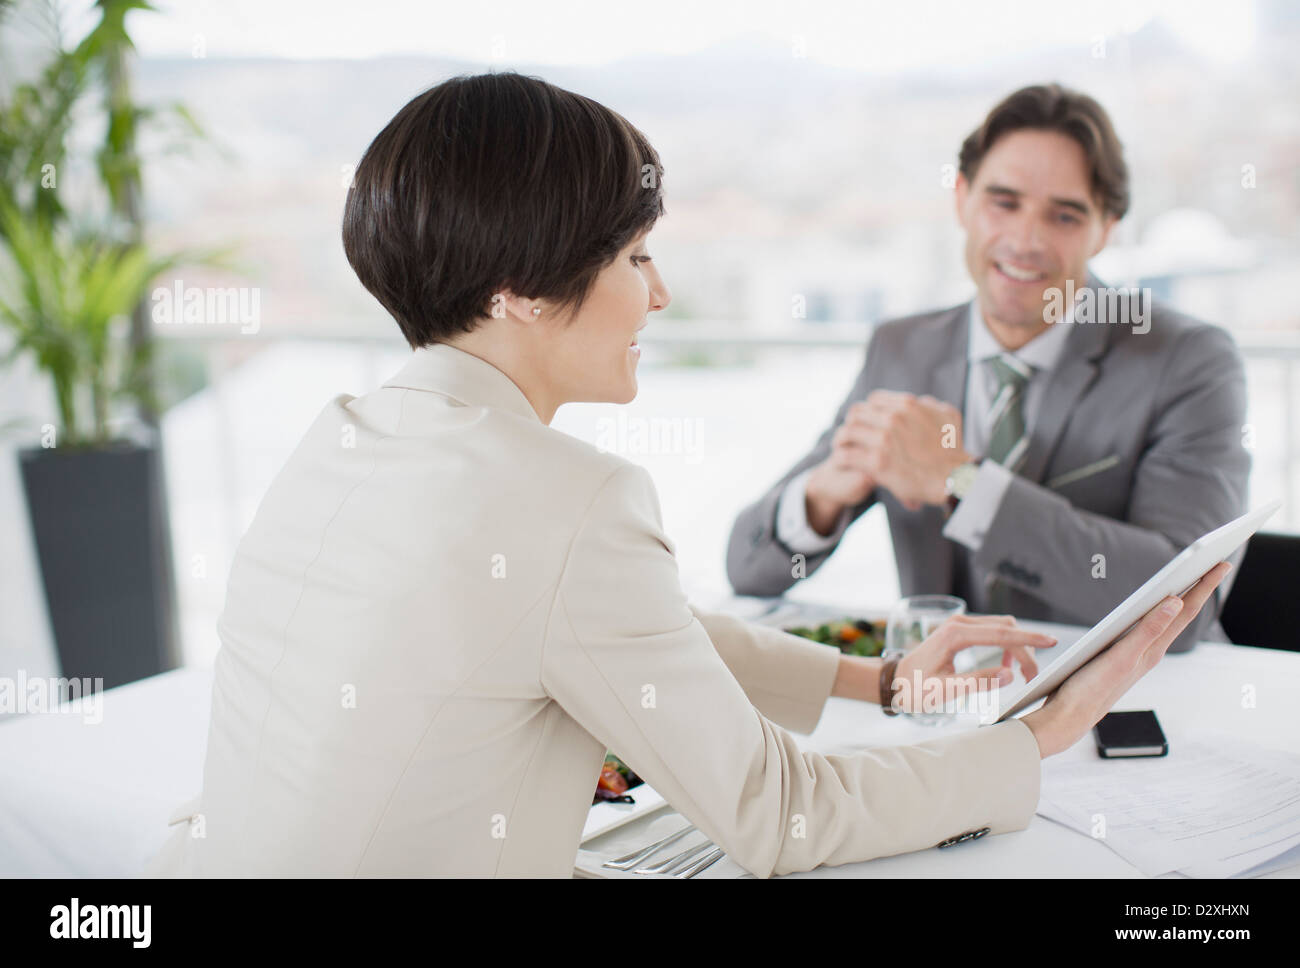 Businessman and businesswoman using digital tablet at restaurant table Banque D'Images